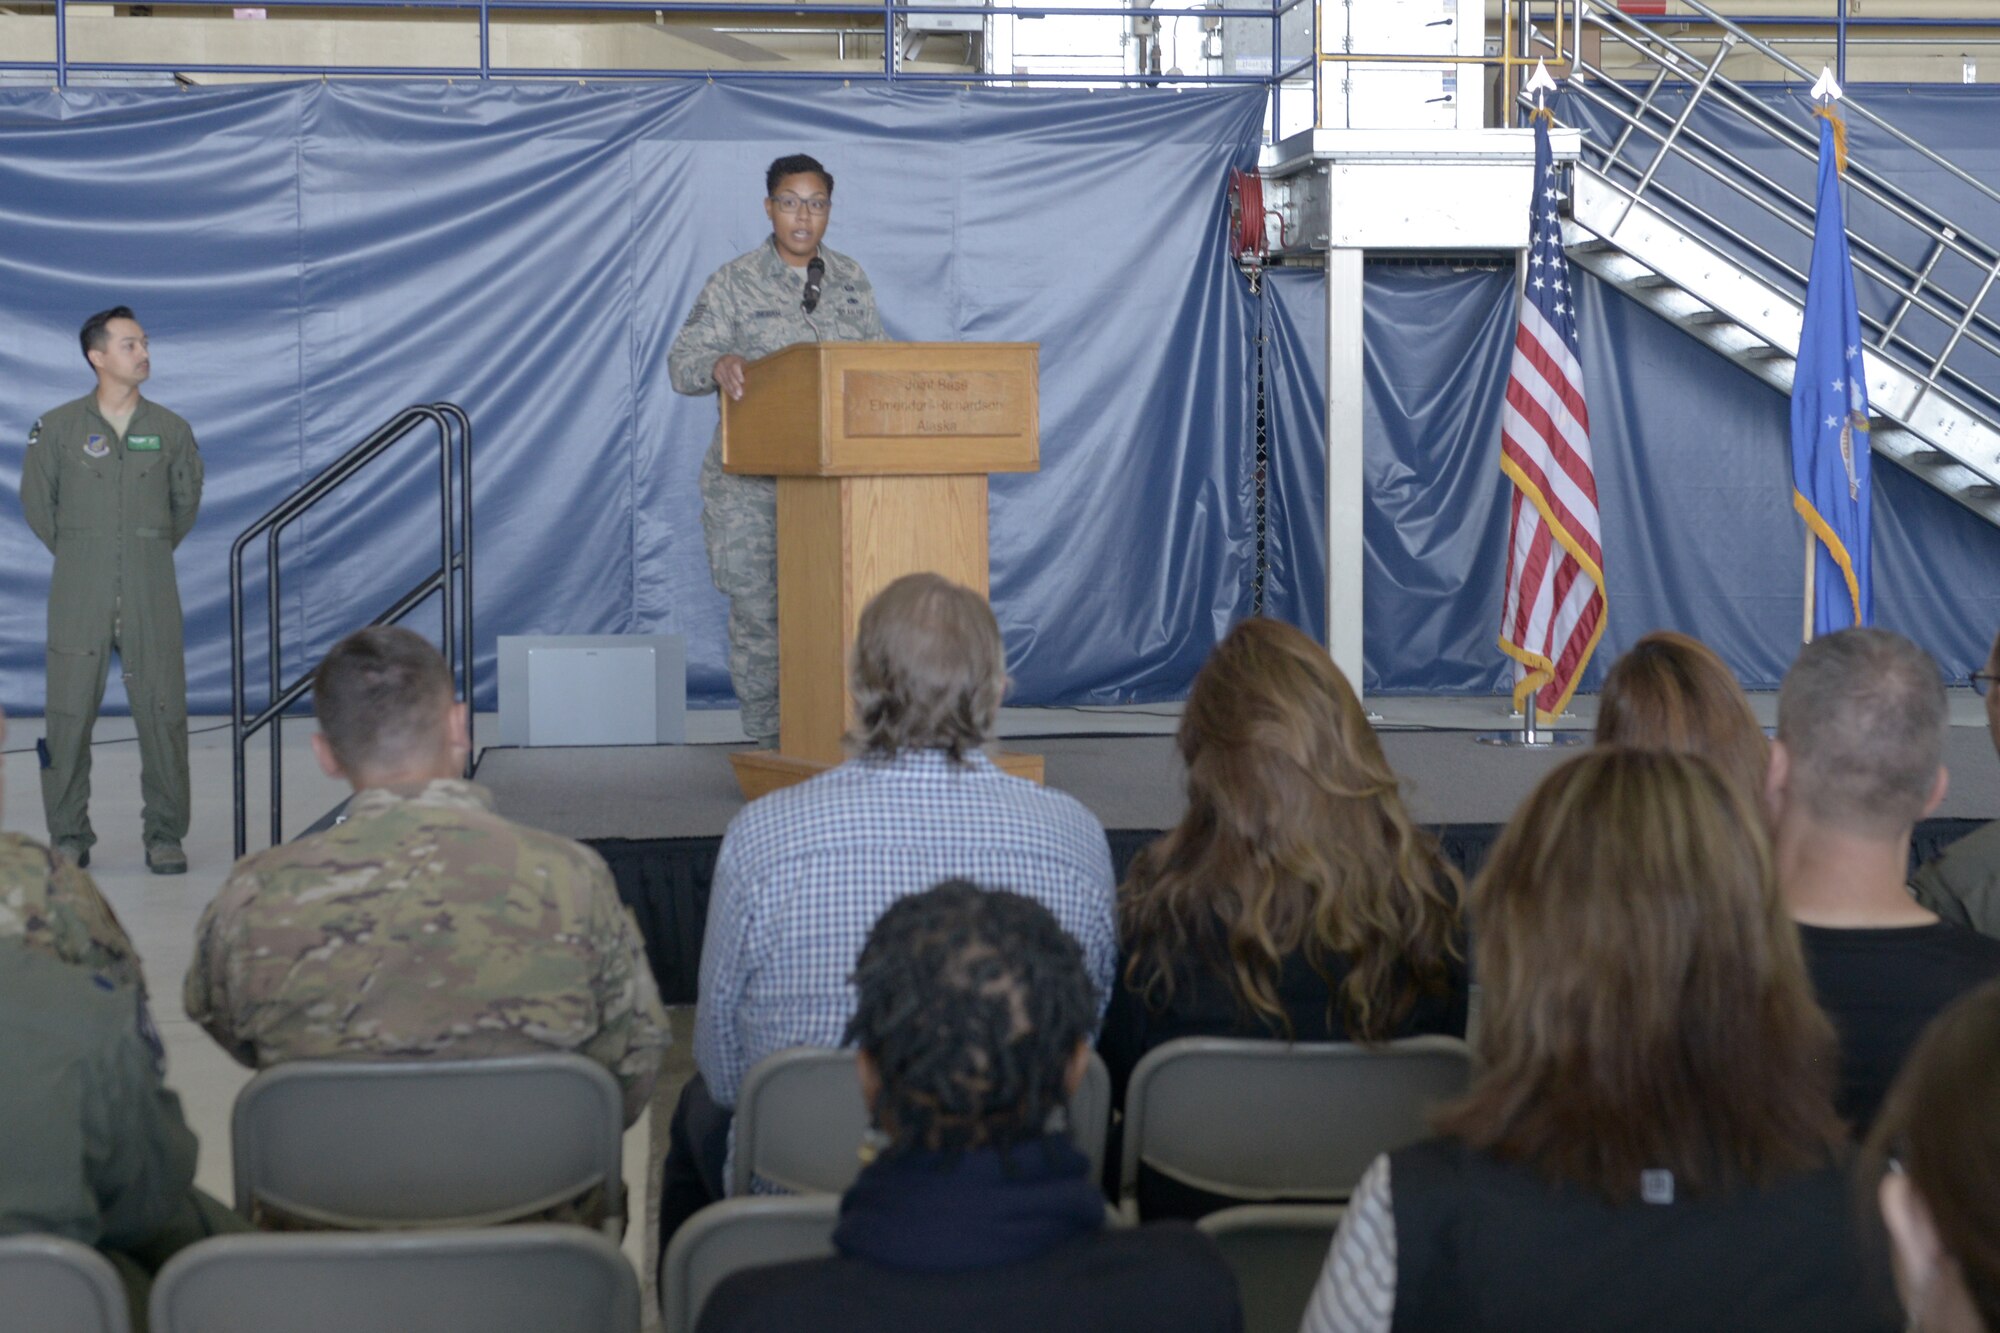 U.S. Air Force Tech. Sgt. Samoana Ingram, 962nd Airborne Air Control Squadron group training manager, gives the history of the 3rd Wing during the opening ceremony for the 3rd Wing’s 100th anniversary celebration on Joint Base Elmendorf-Richardson, Alaska, July 25, 2019